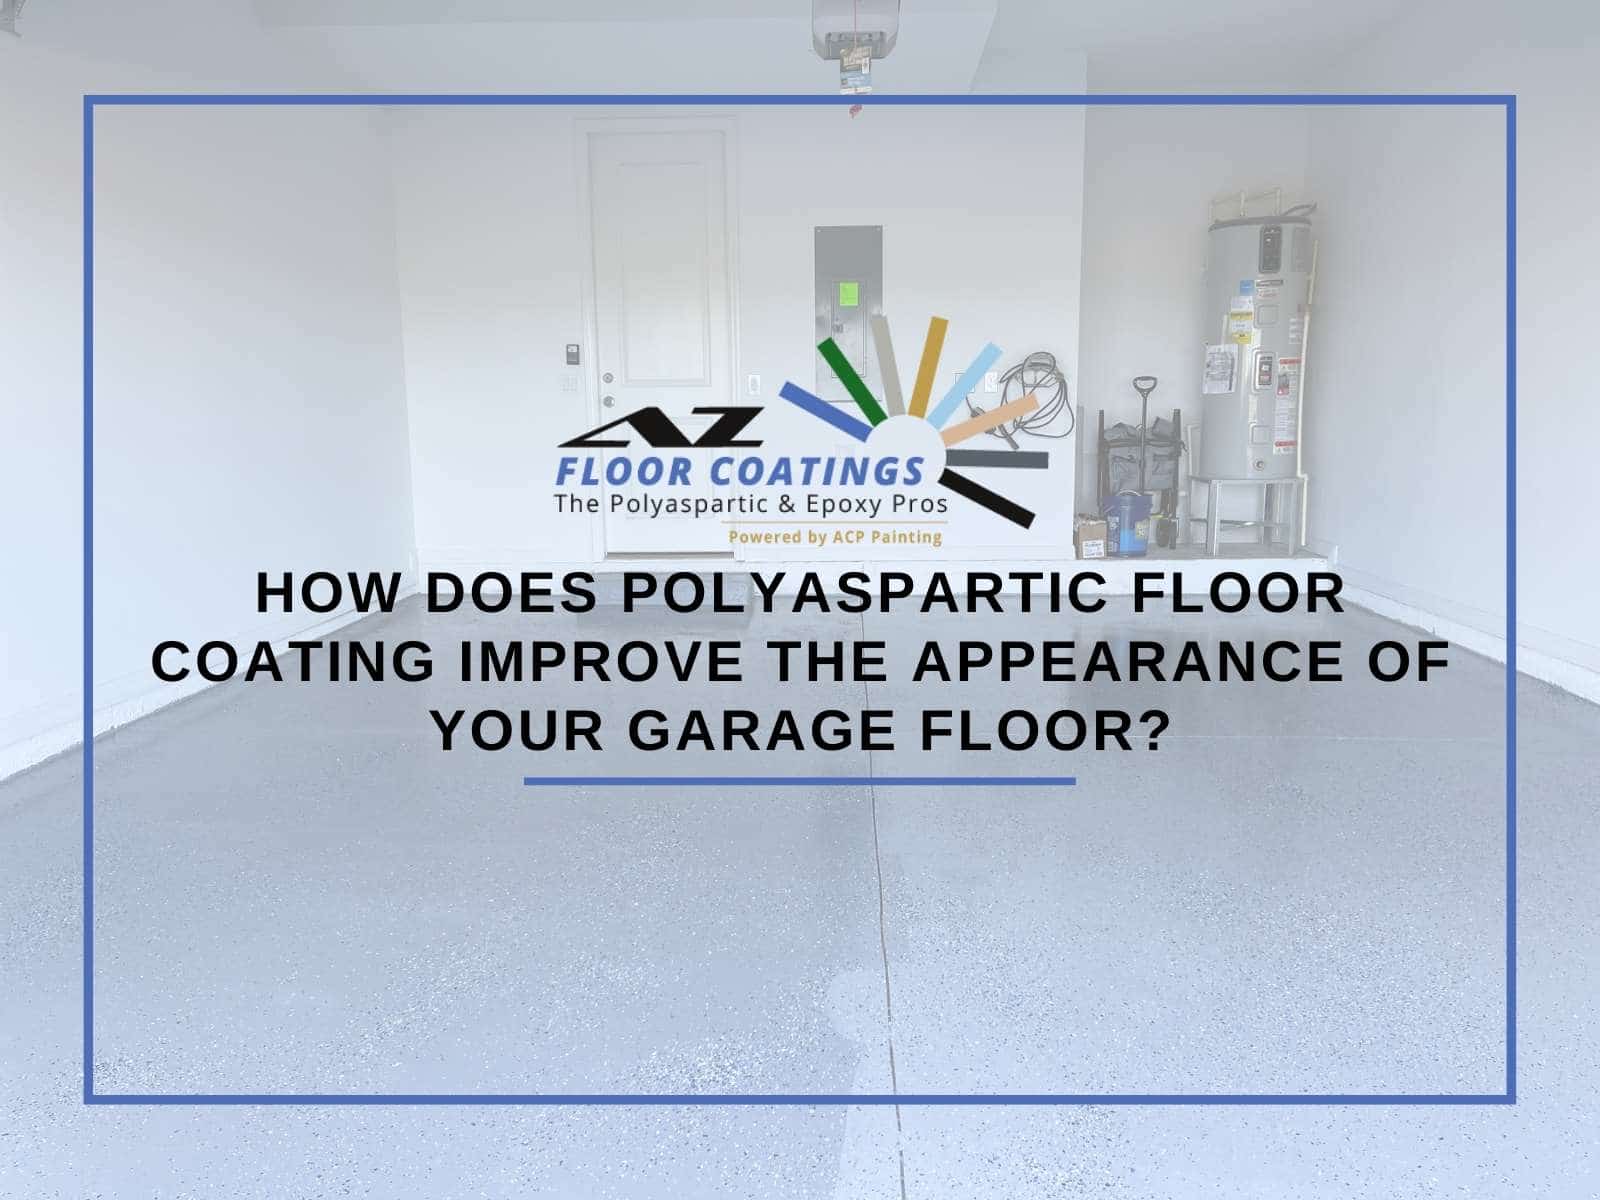 How Does Polyaspartic Floor Coating Improve The Appearance Of Your Garage Floor